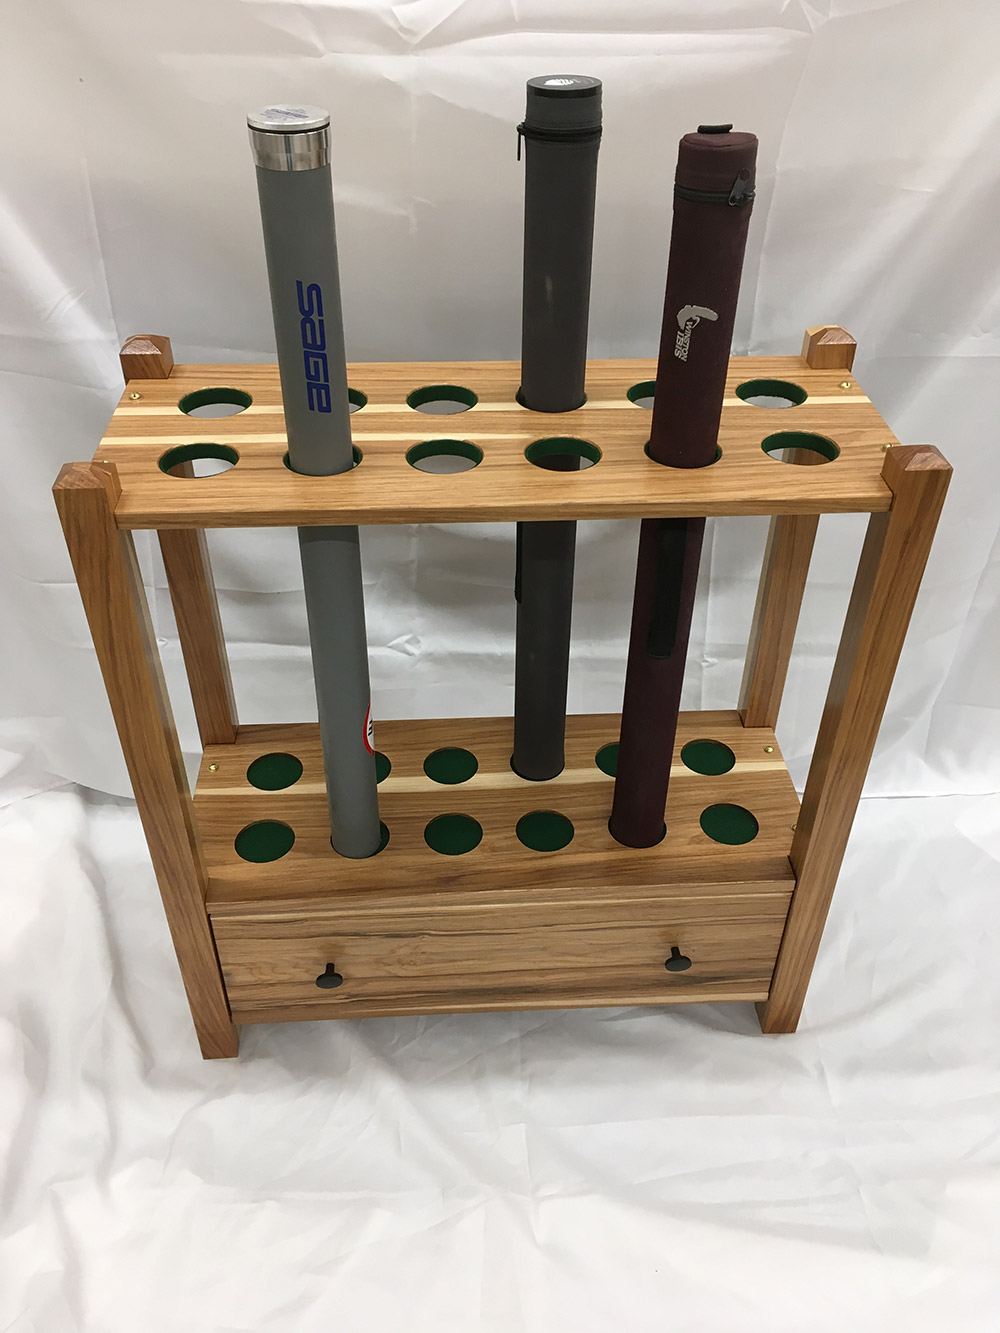 Custom Fly fishing cabinets from New Hamphire: Solid Cherry Wood